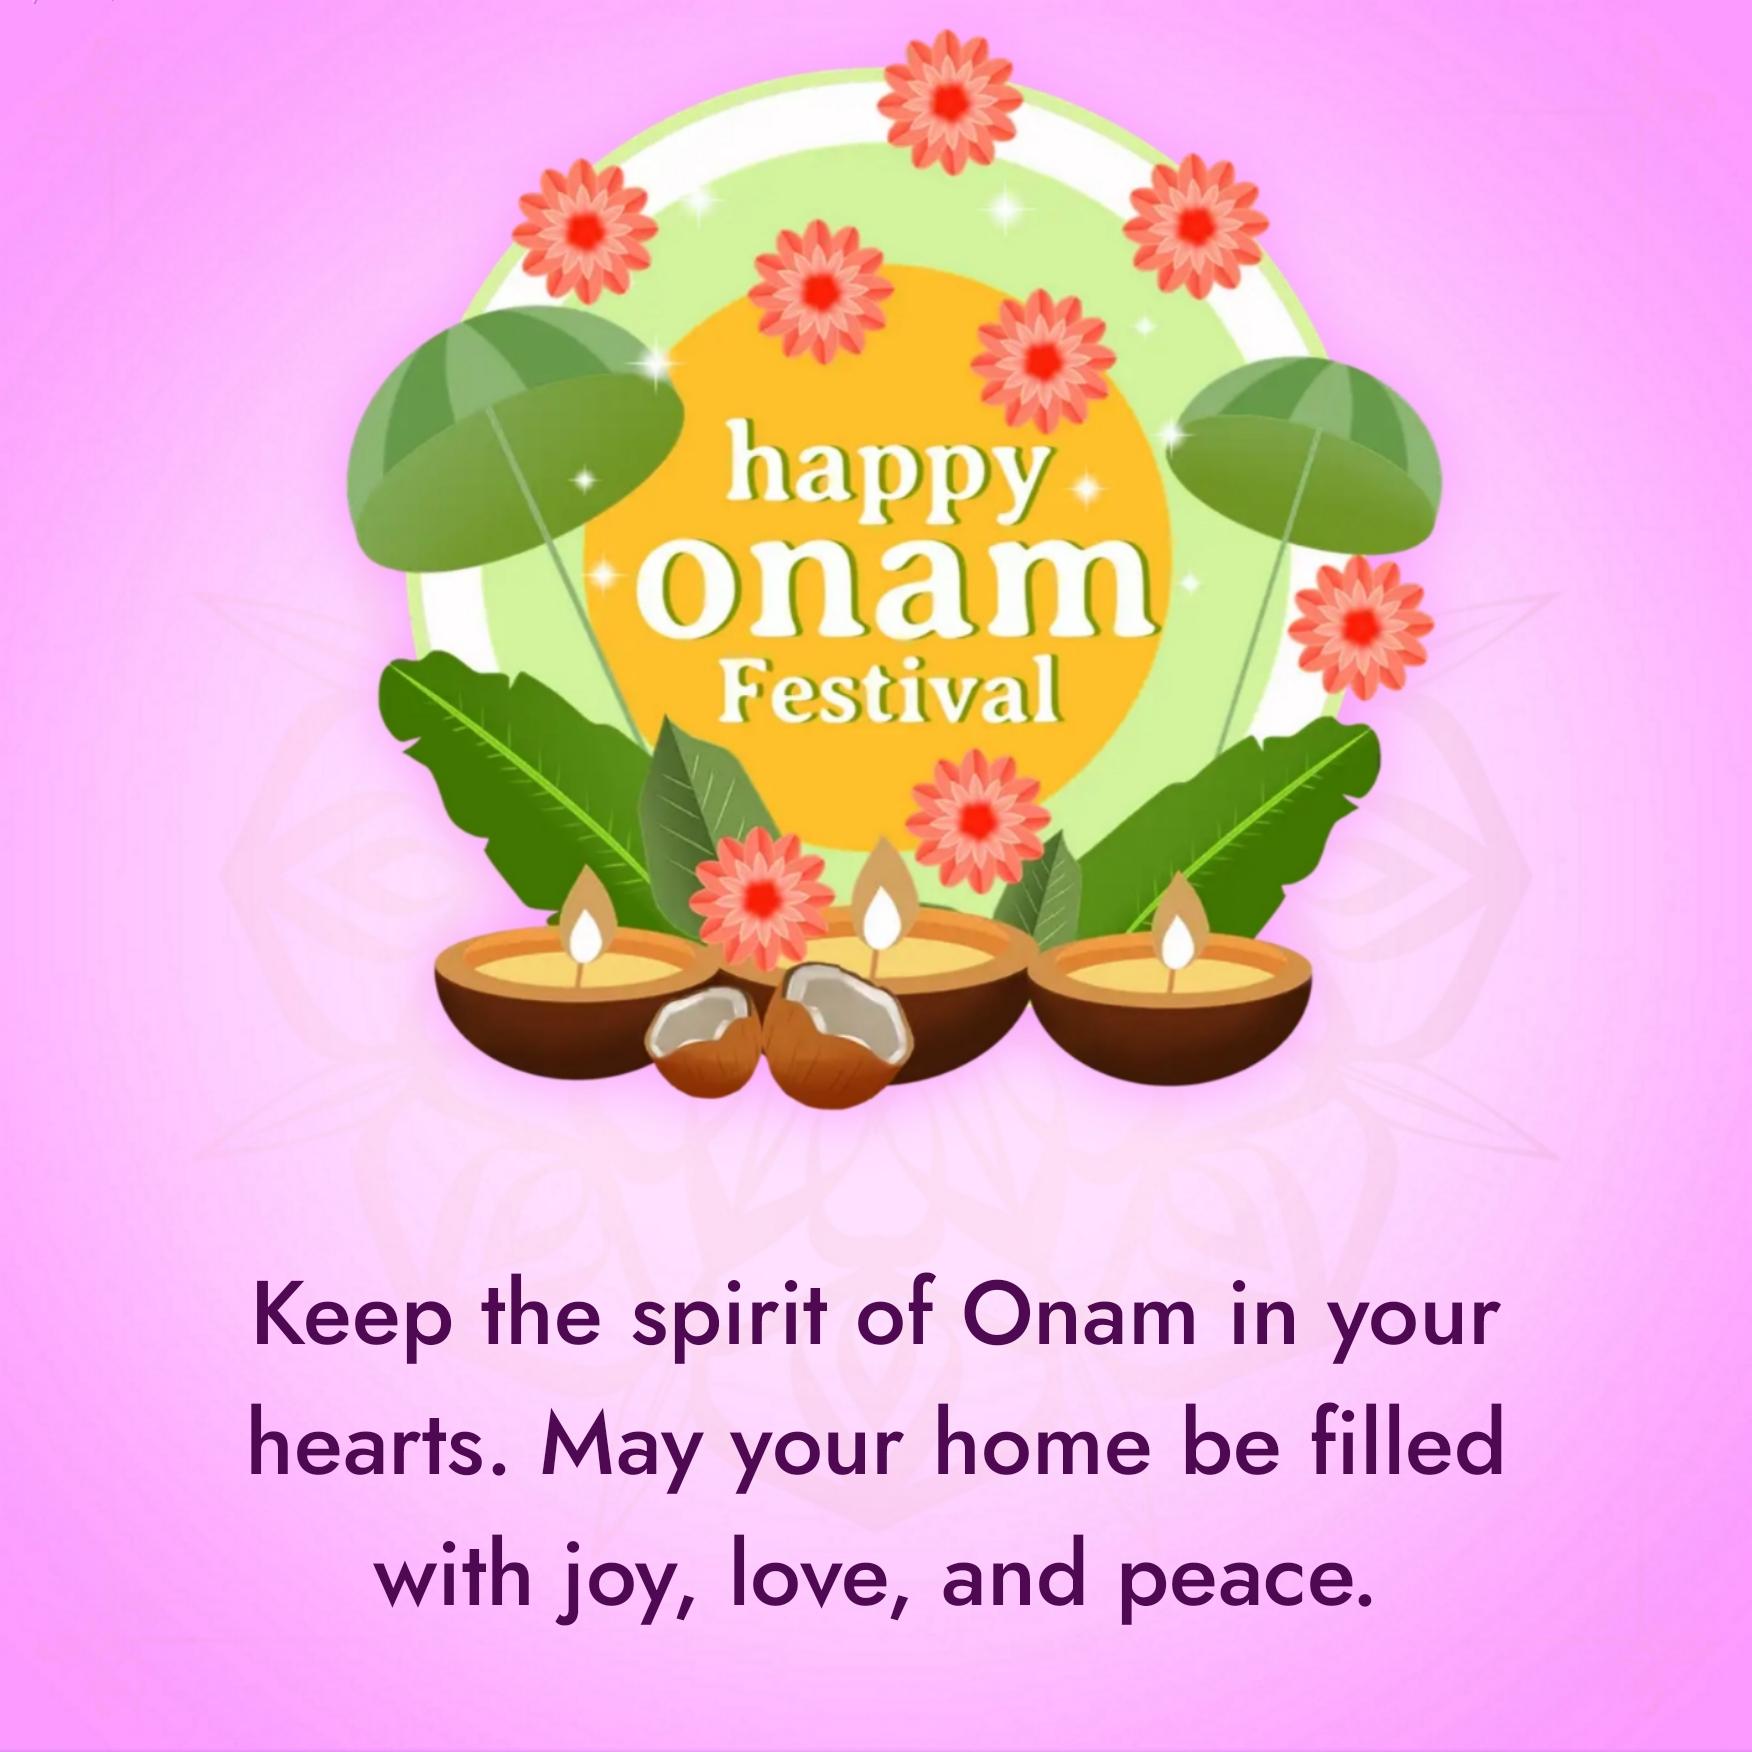 Keep the spirit of Onam in your hearts